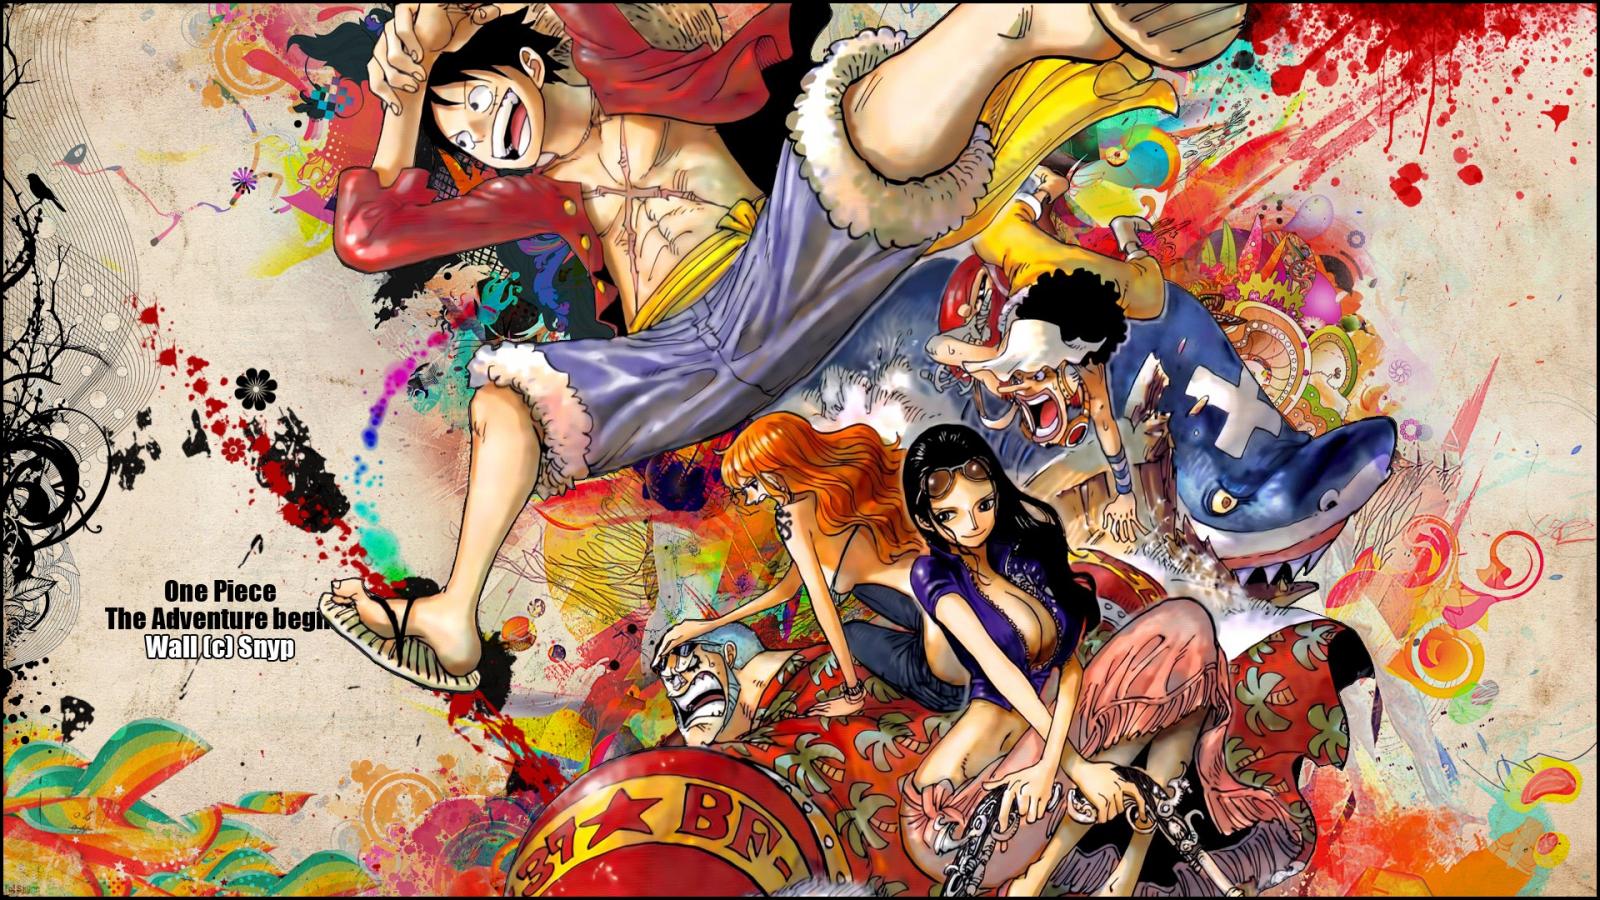 One Piece 壁紙8 Picture Room One Piece 壁紙集 アニメワンピース 海賊王を目指すルフィと仲間達の冒険 Naver まとめ